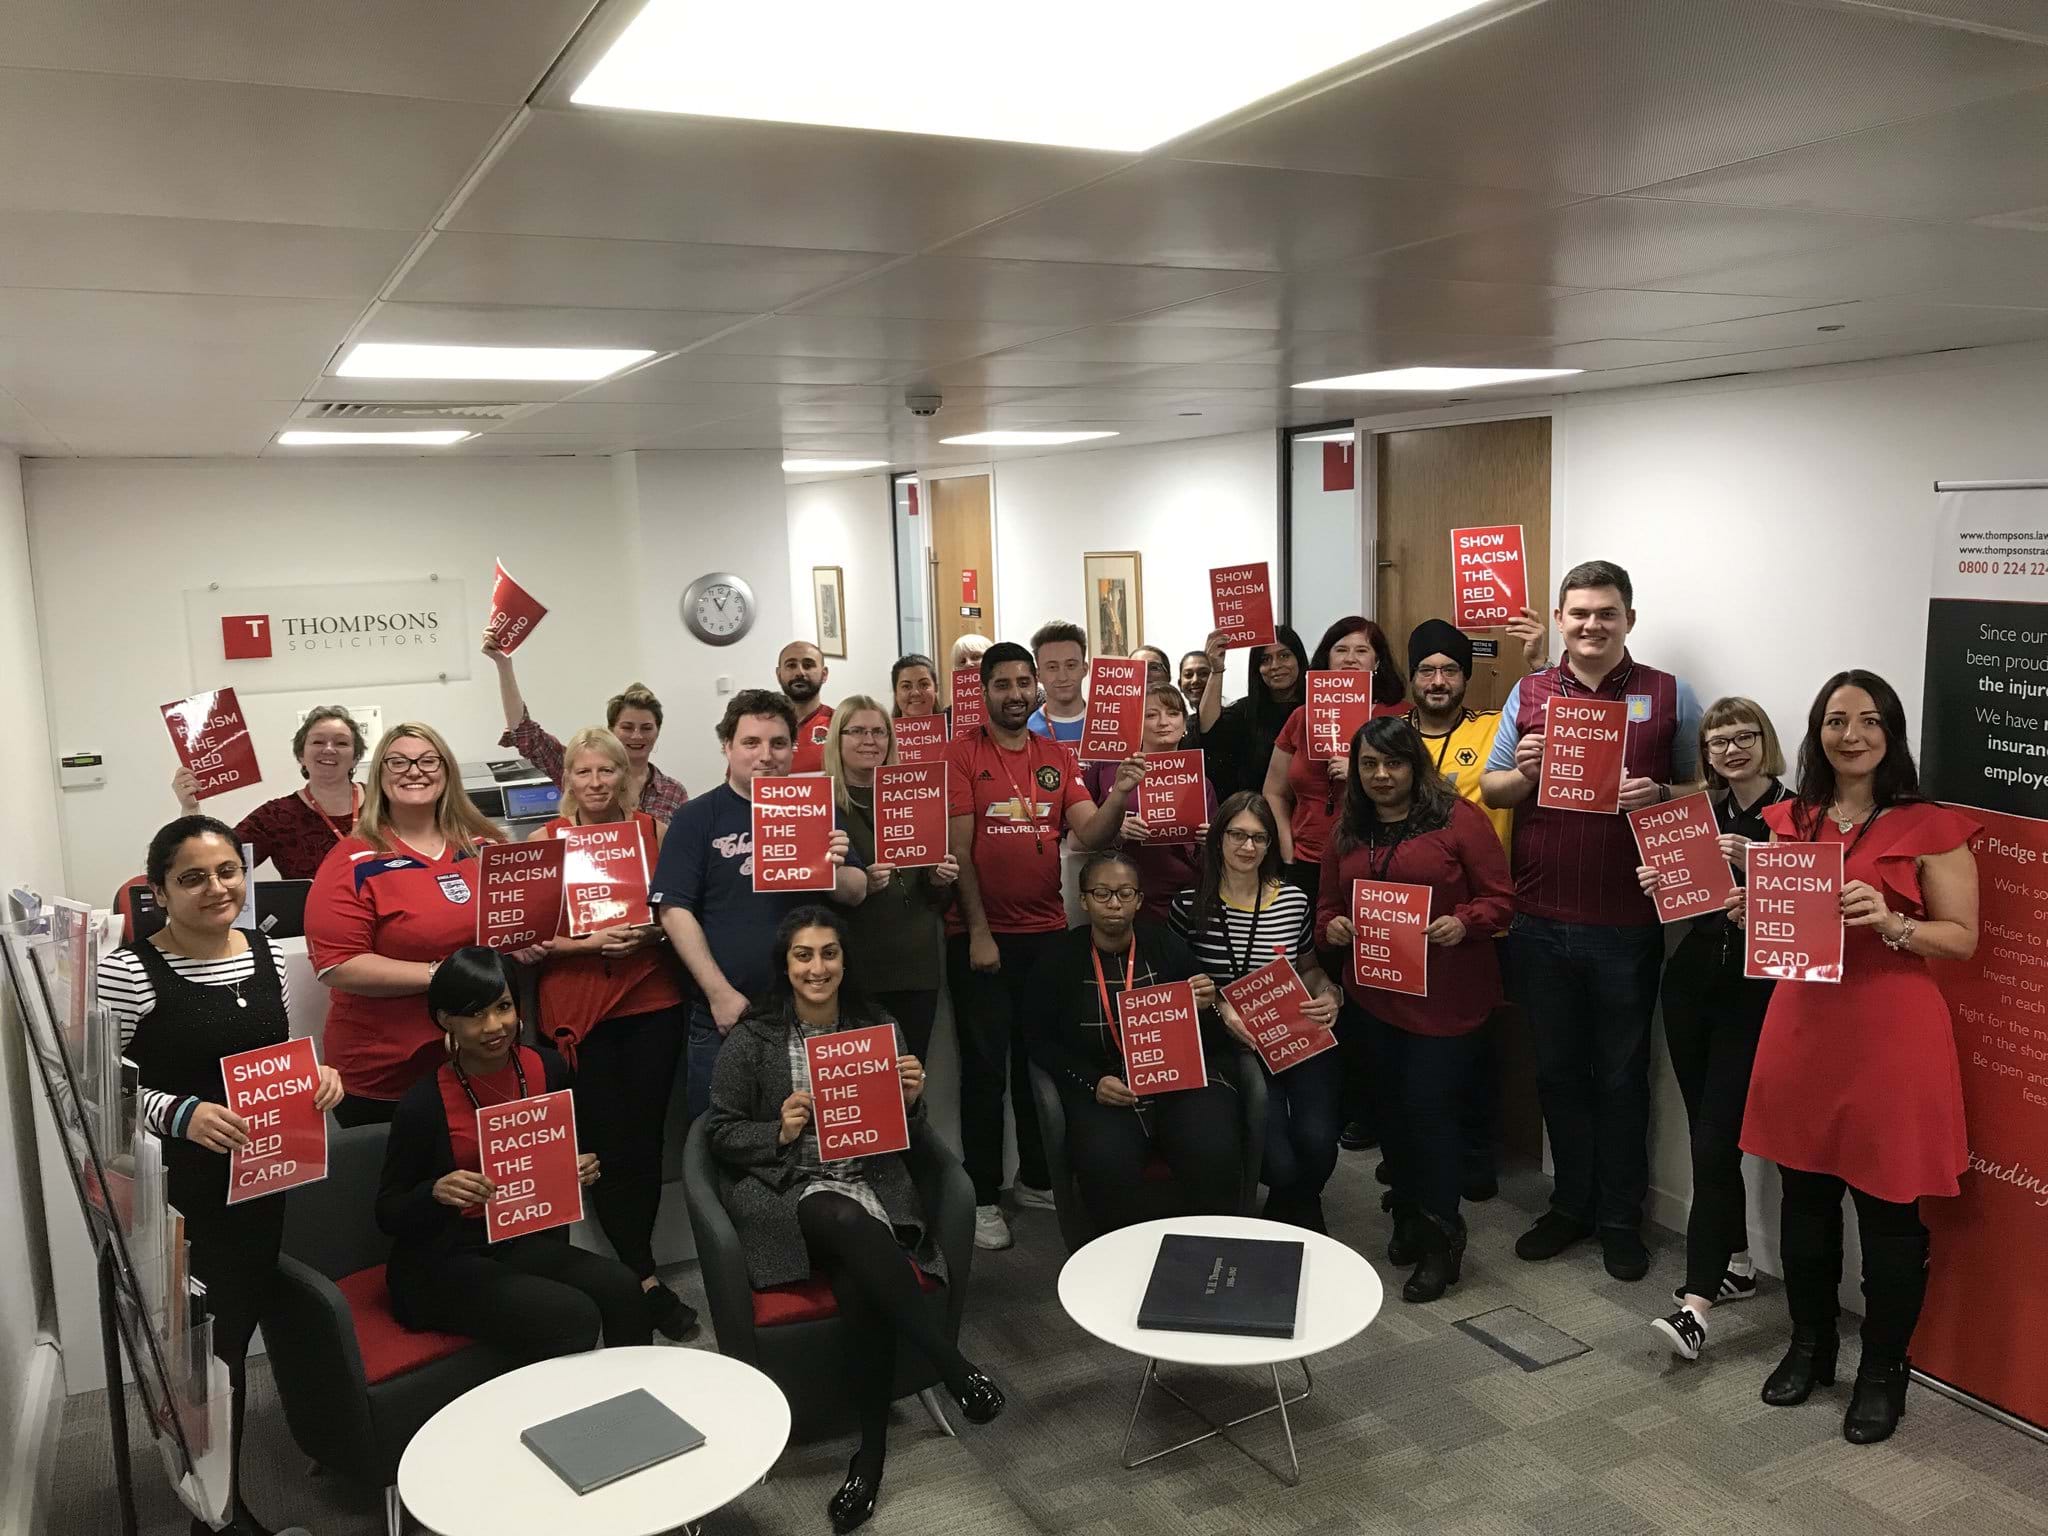 Thompsons Solicitors’ Birmingham team fundraise for Wear Red Day 2019